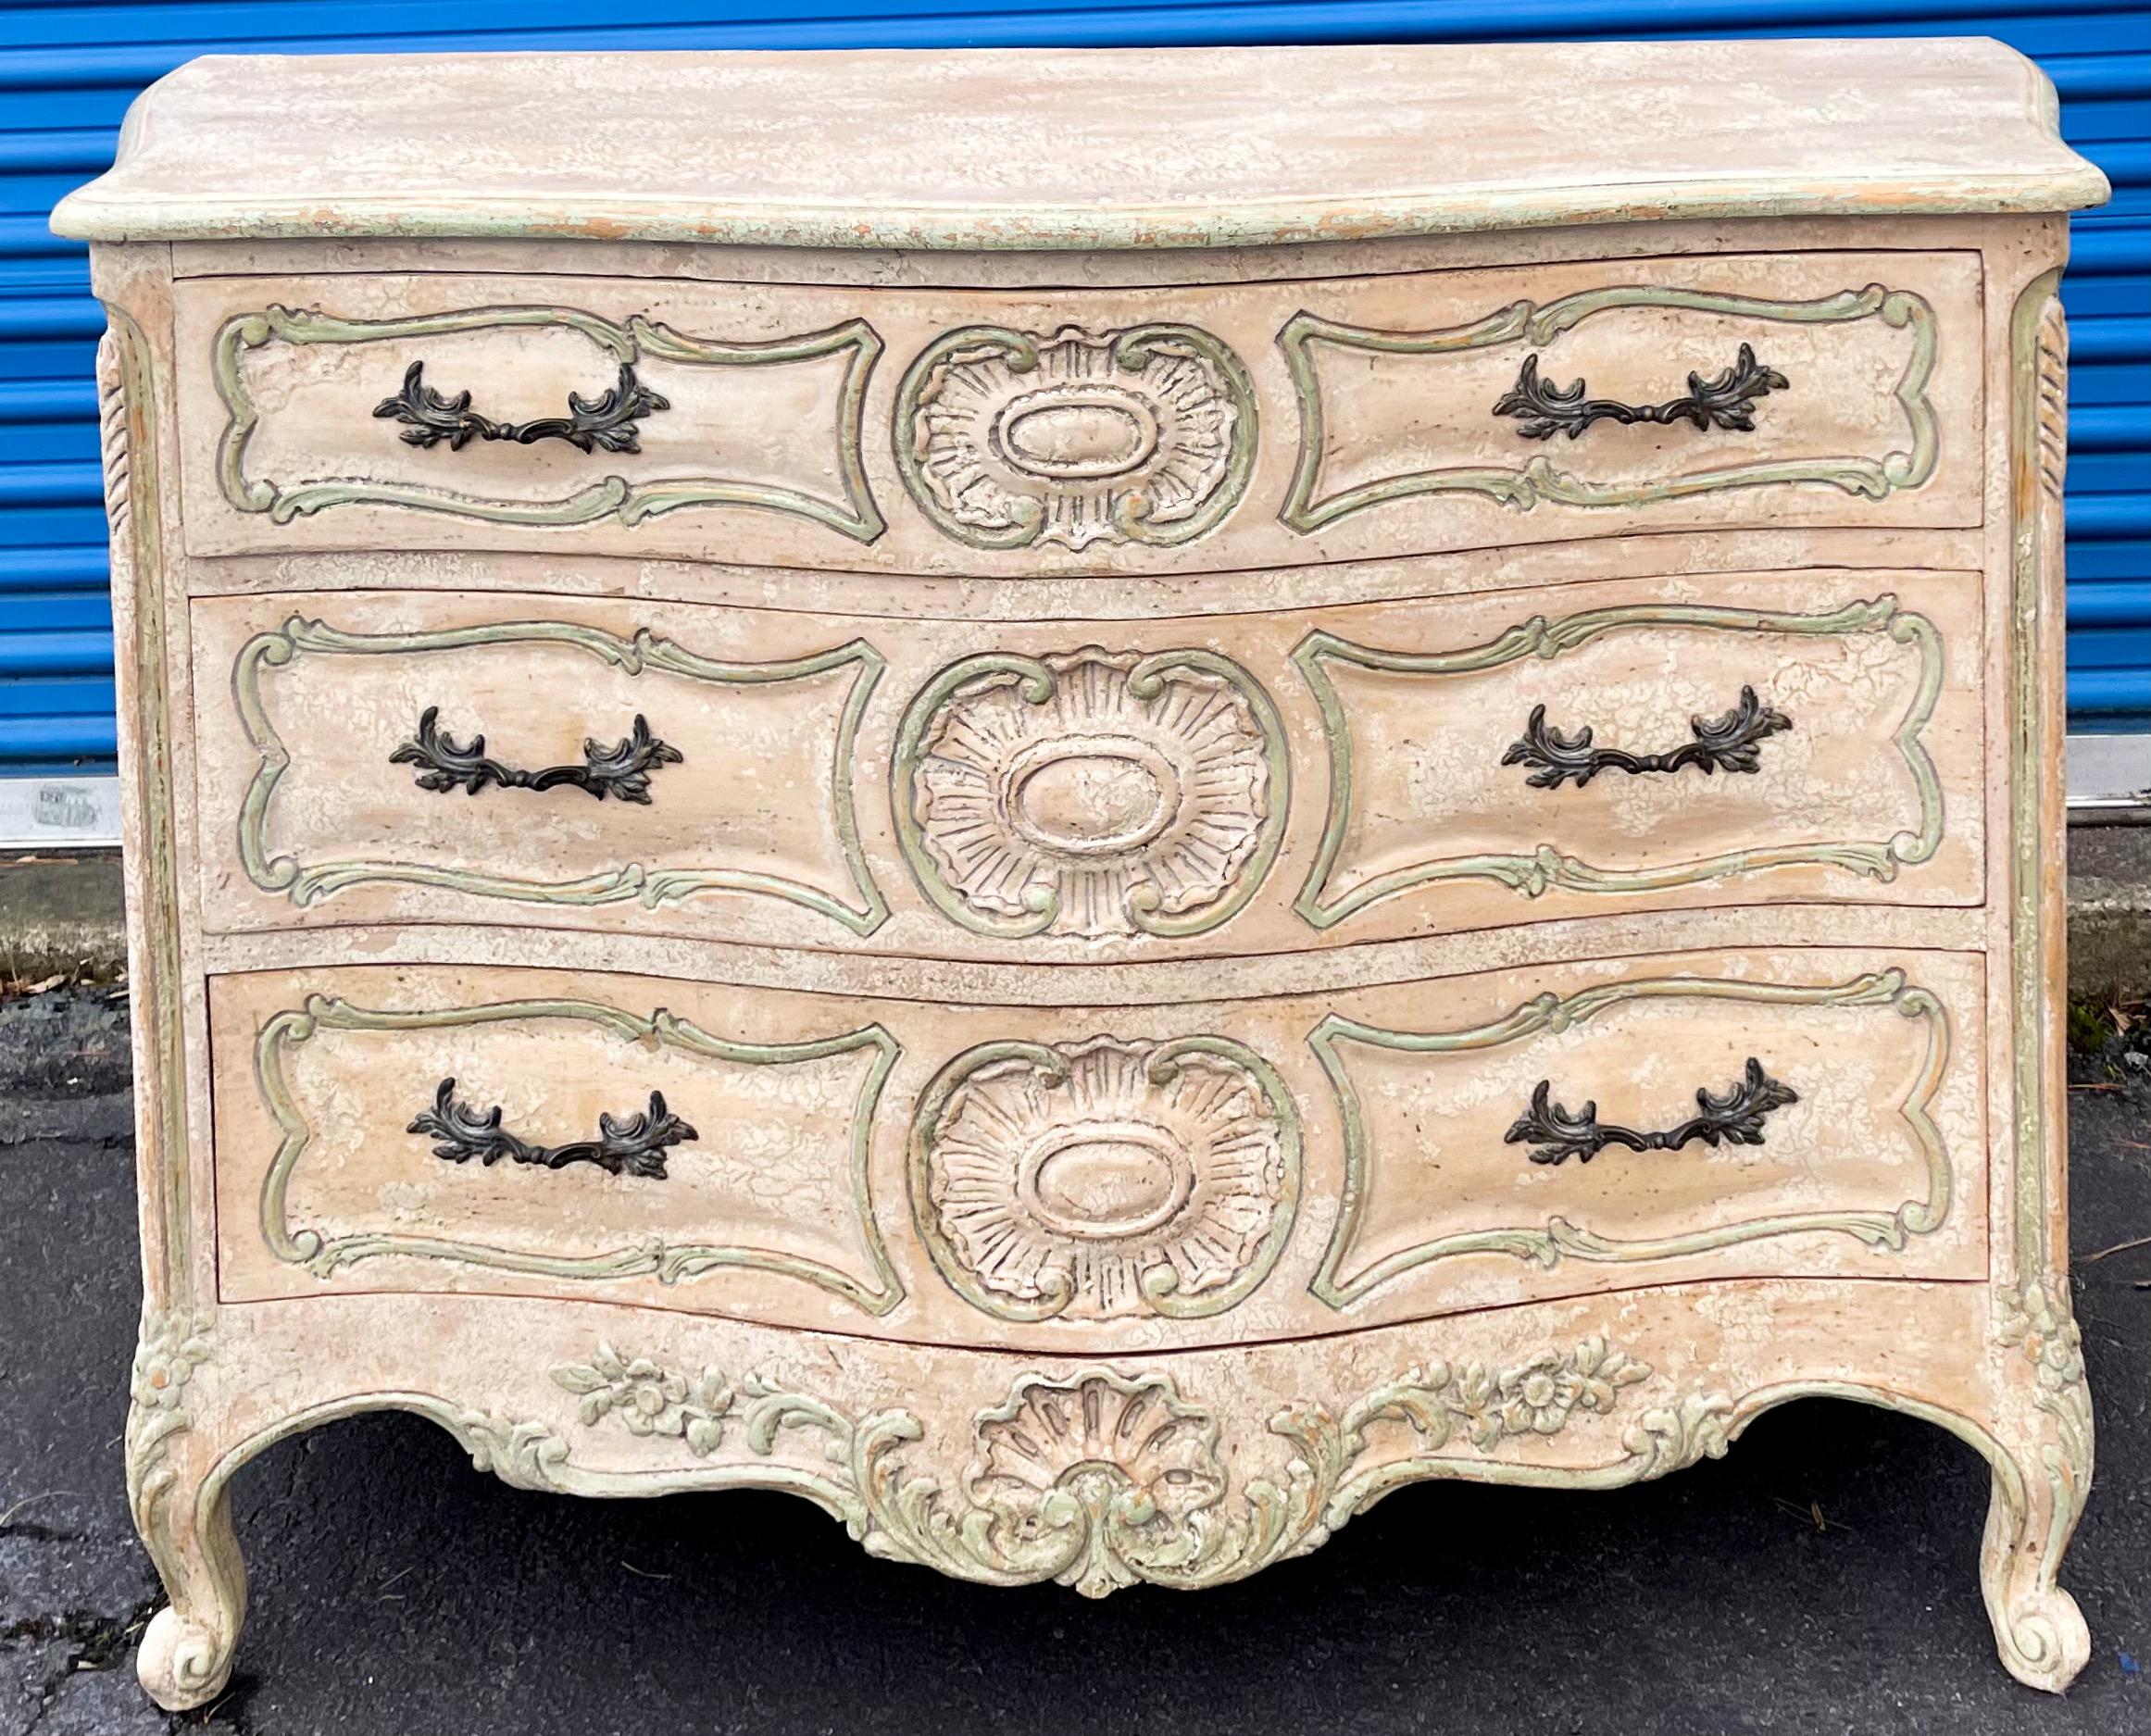 Love the finish and size! This chest is actually an Italian piece with French Louis XVI styling. The cerused finish is accented with a celadon green. It is in very good condition.